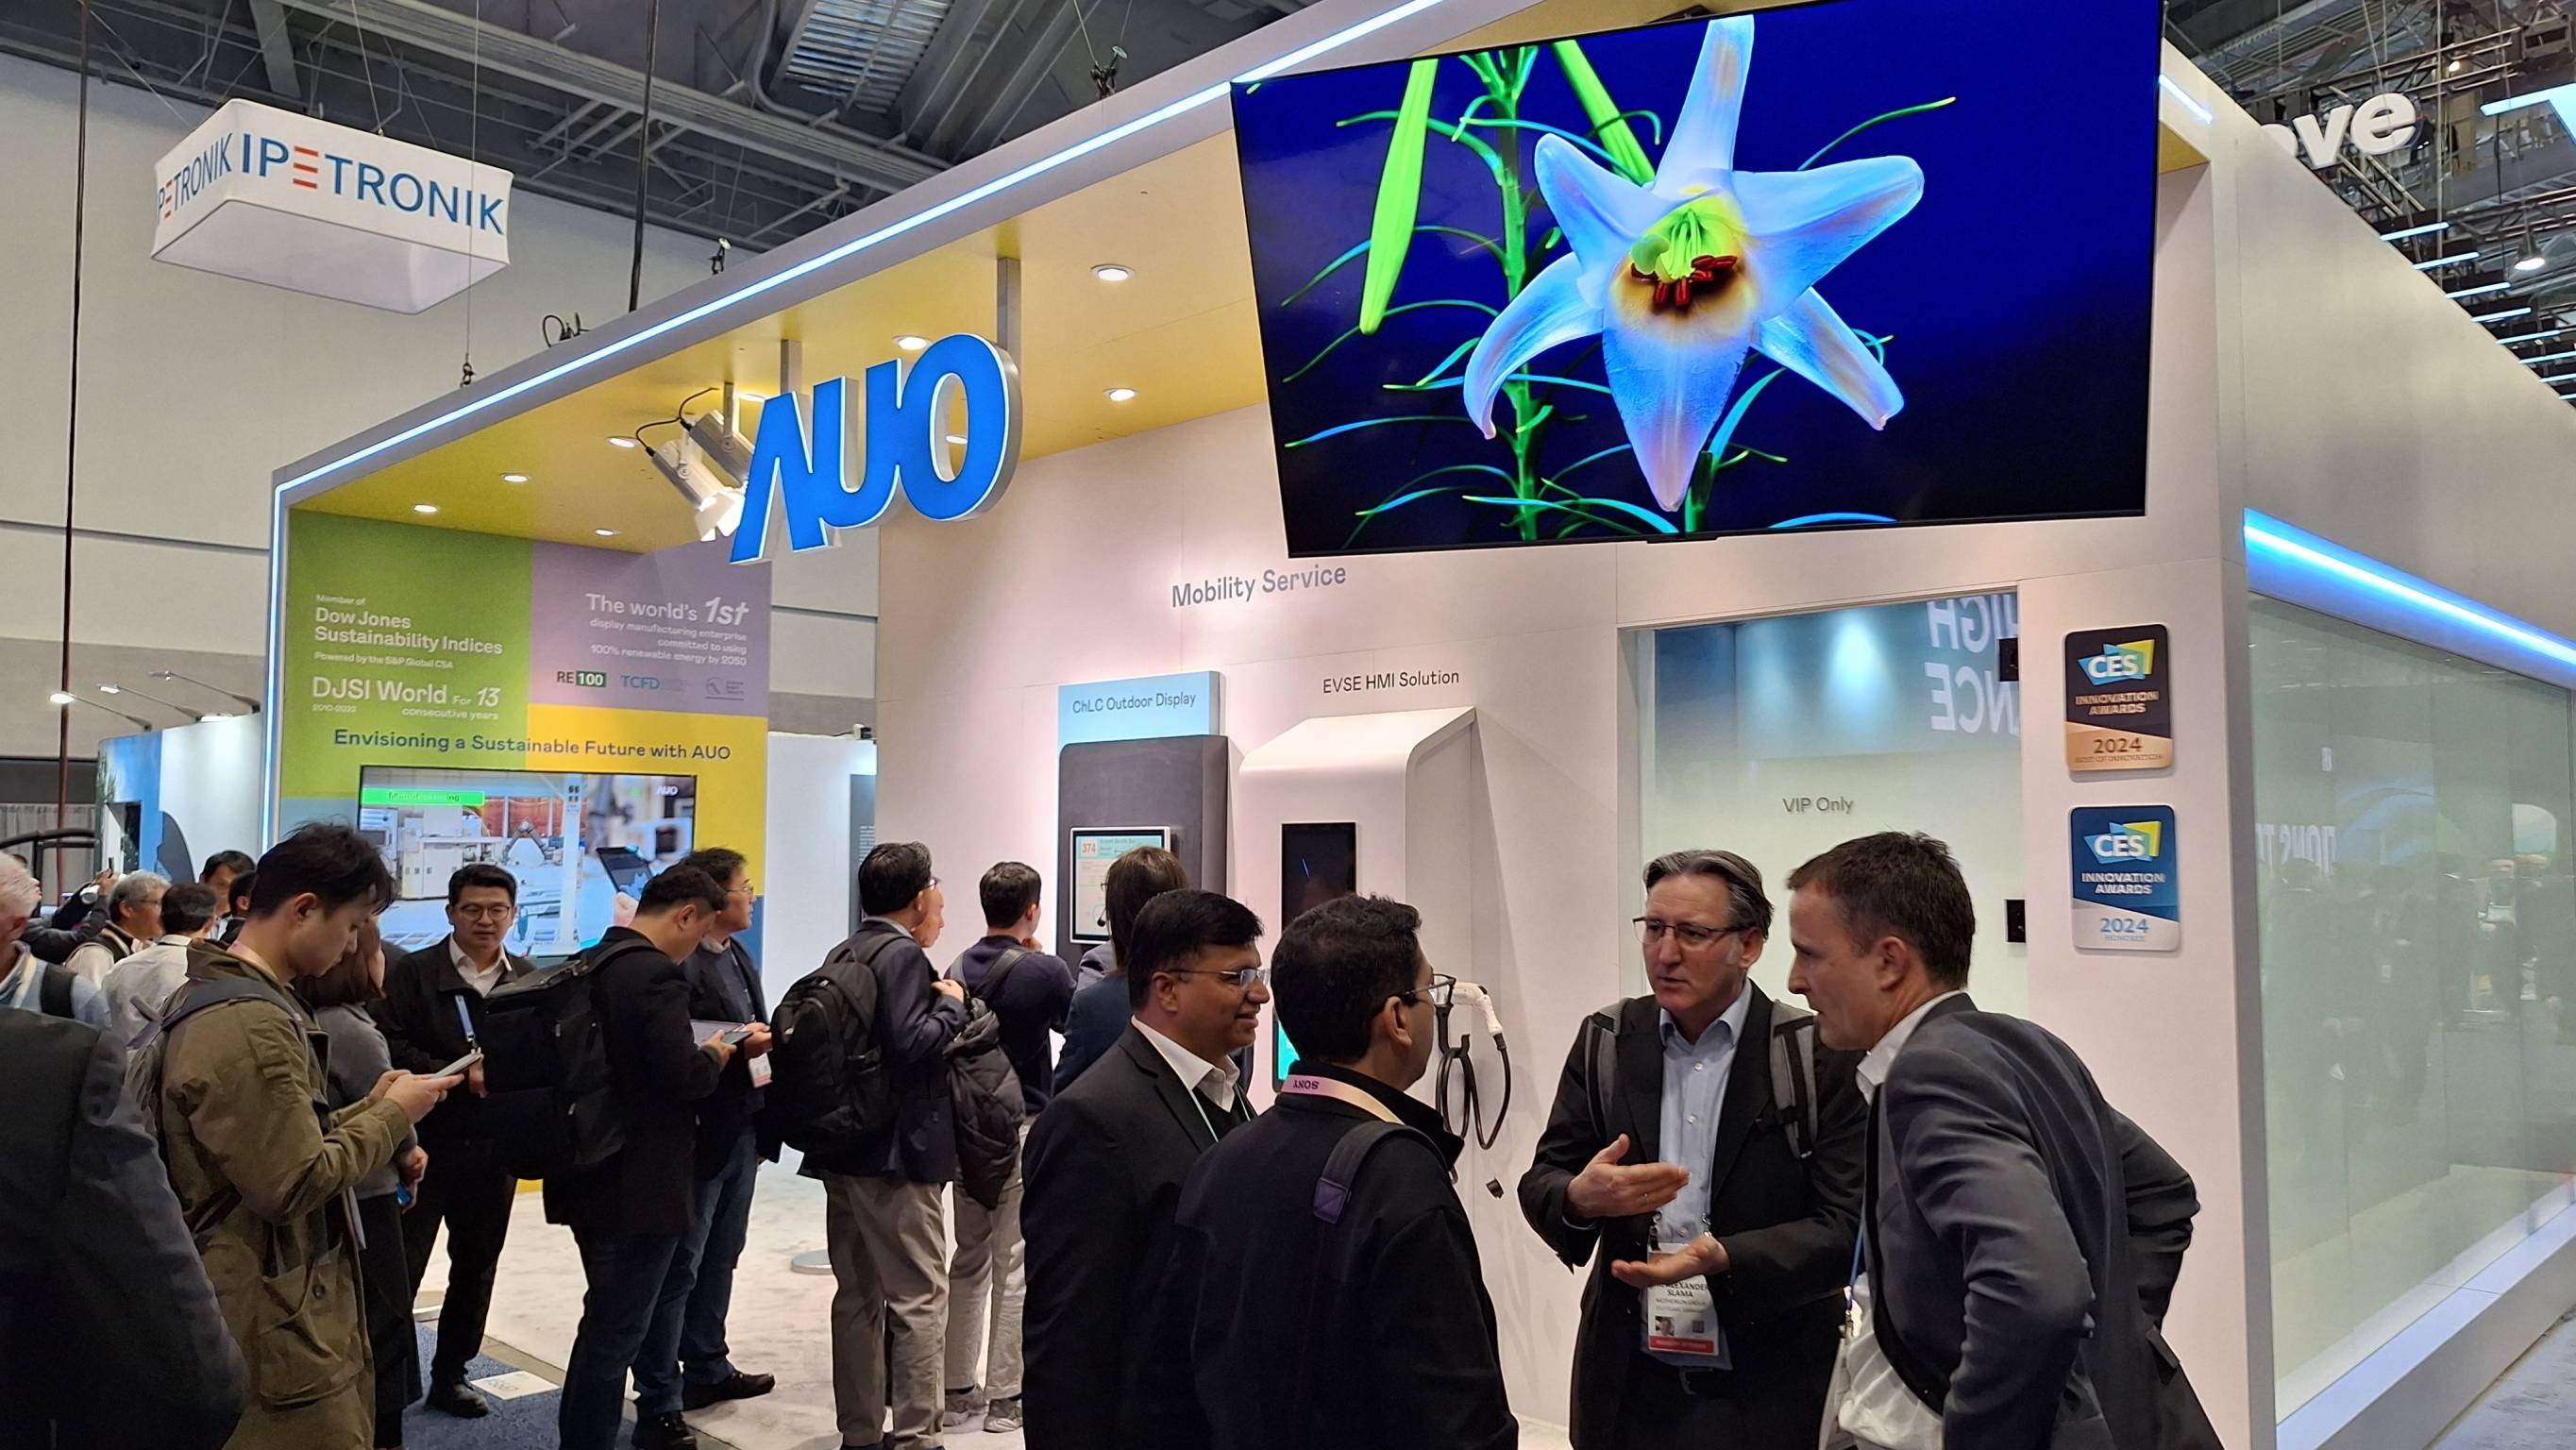 The AUO booth was a highlight of the event, captivating attendees with its futuristic designs and interactive showcases that brilliantly showcased the convergence of technology and automotive ingenuity.